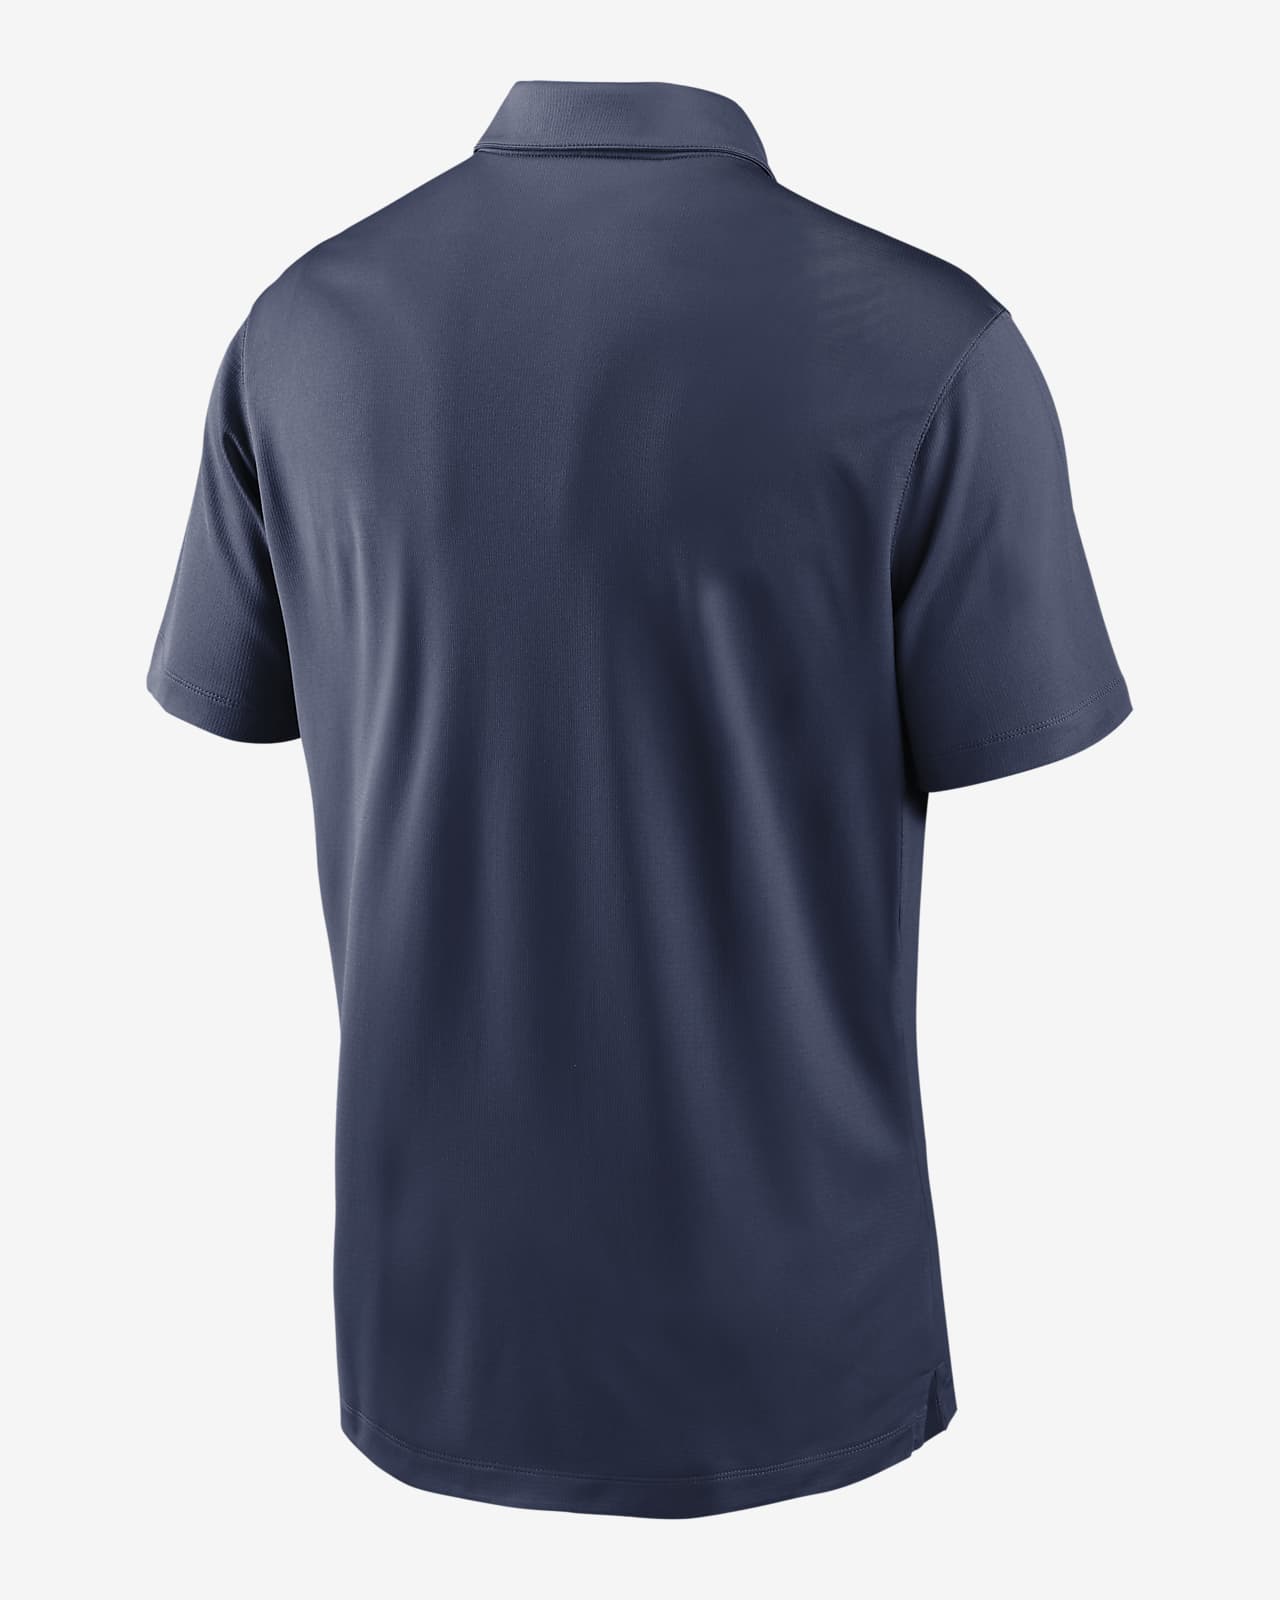 CLEVELAND INDIANS NIKE DRY FIT GOLF SHIRT